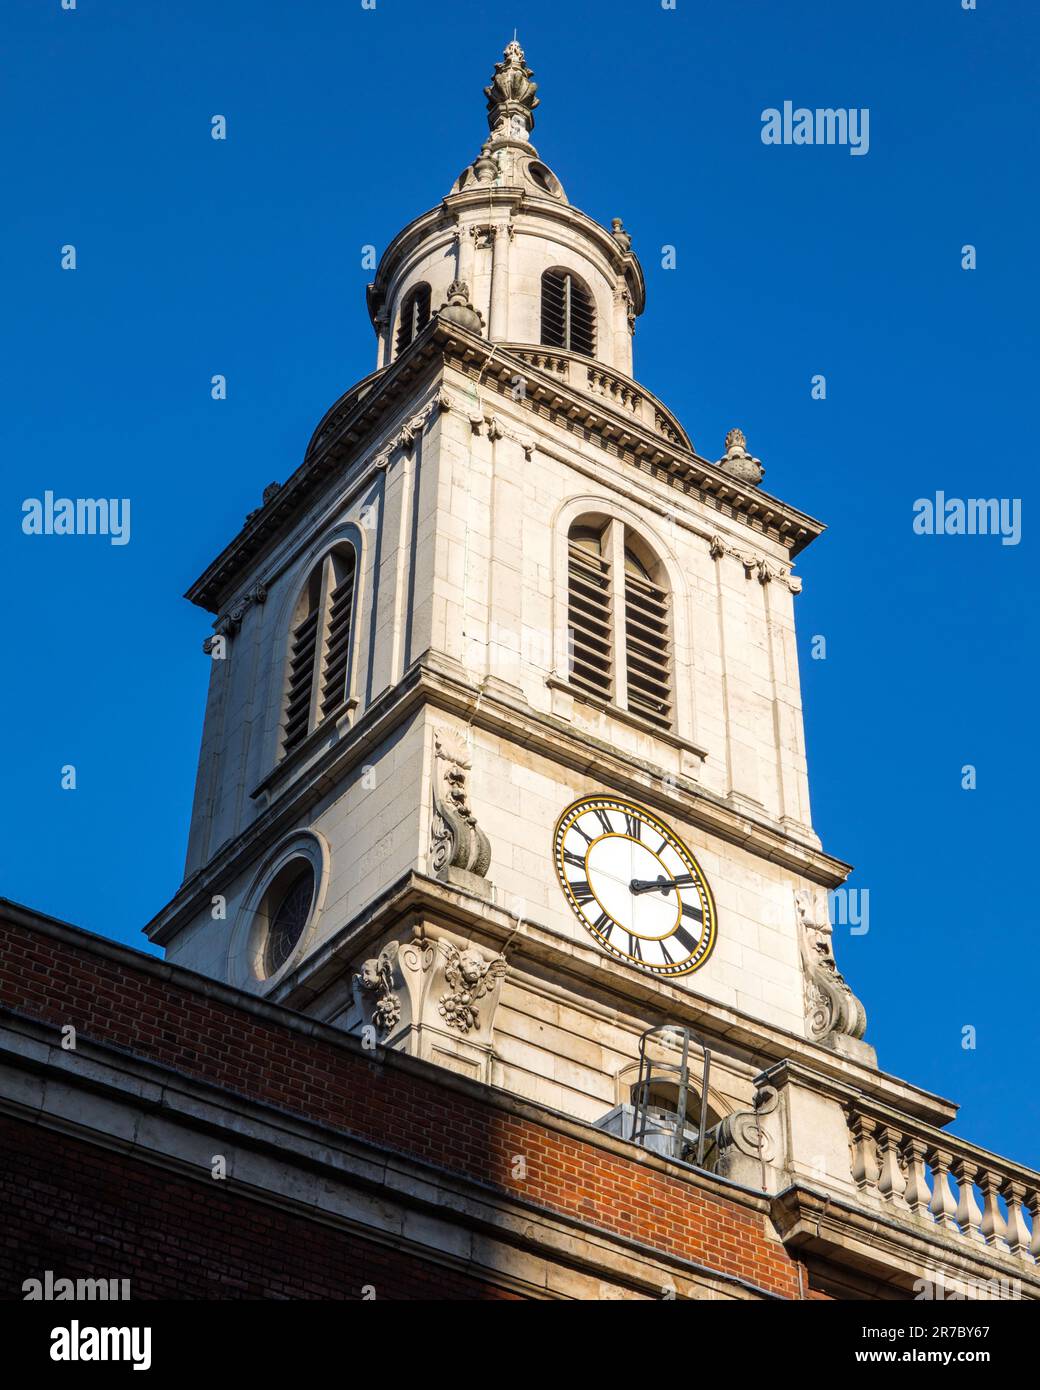 Looking up at the tower of St. Botolph-without-Bishopsgate, in the City of London, UK. Stock Photo